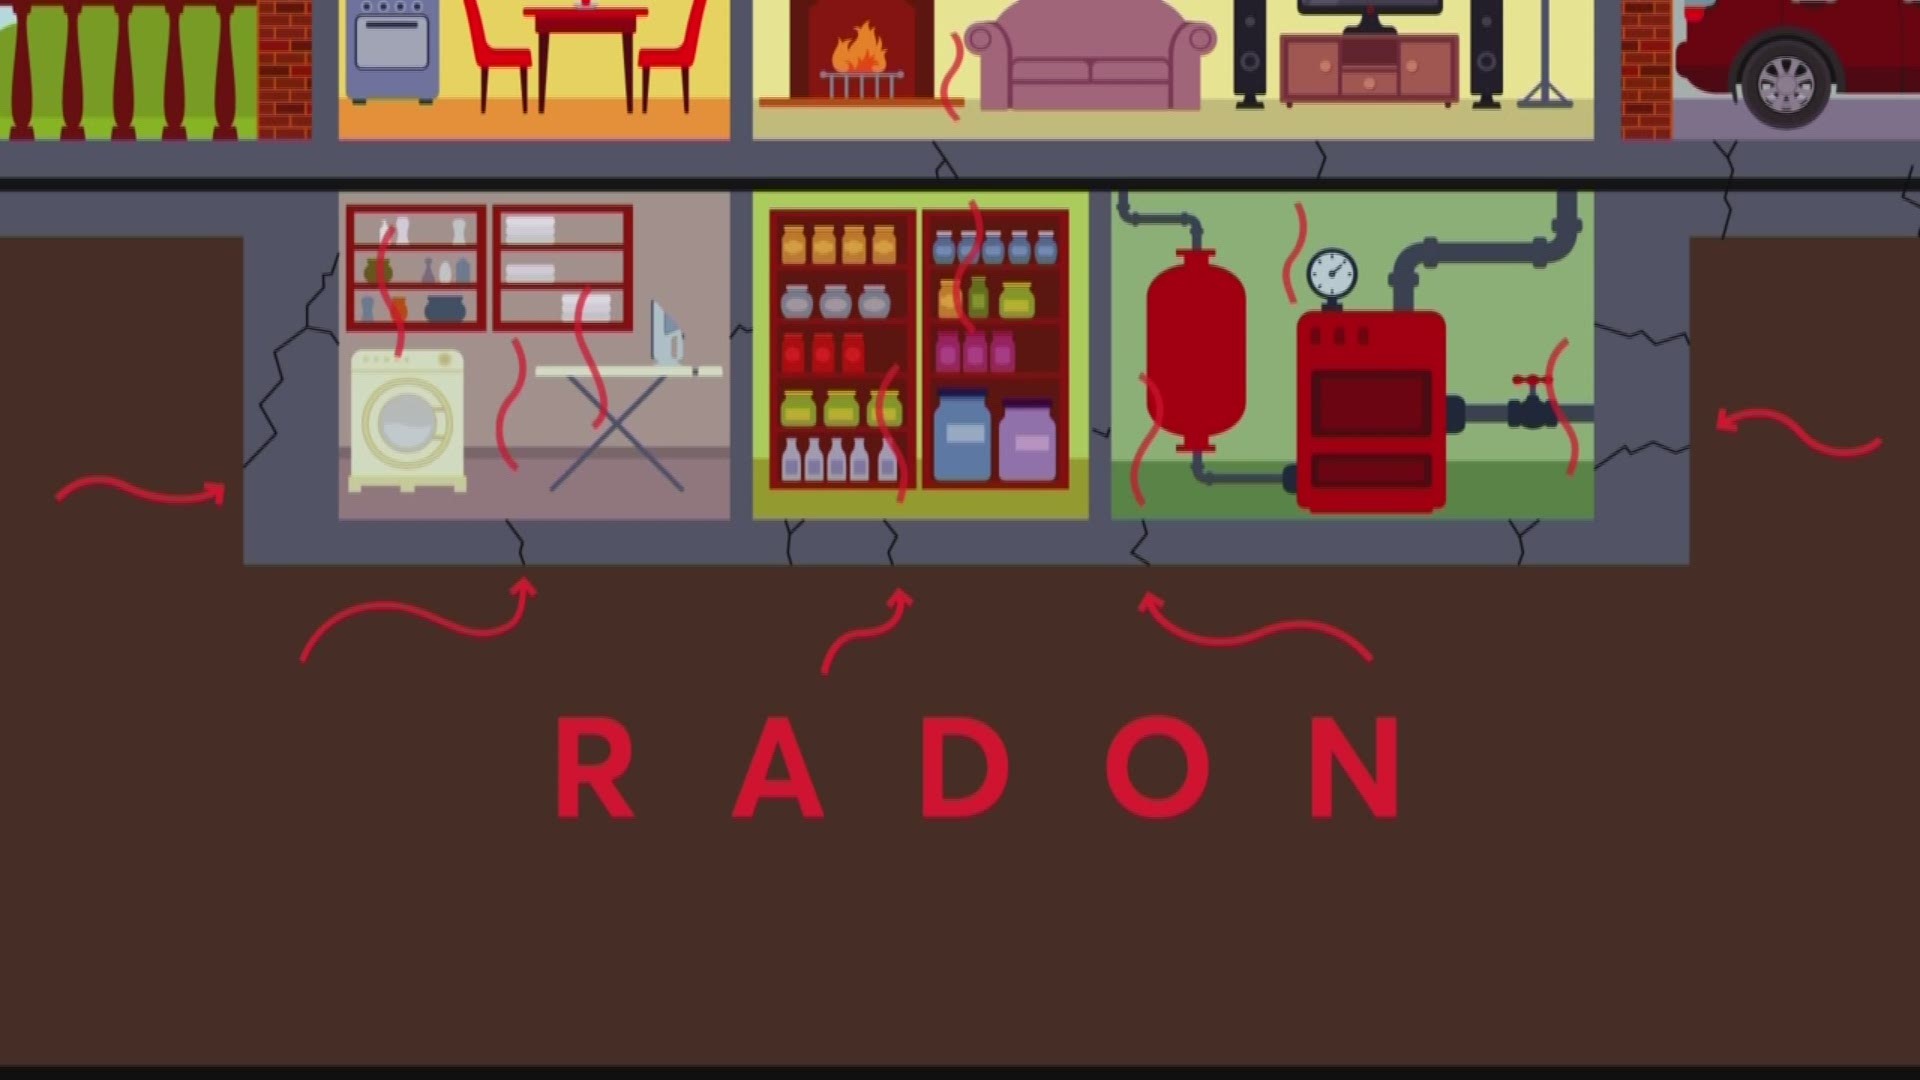 Consumer Reports looks into the risks of radon gas and how to test your home.